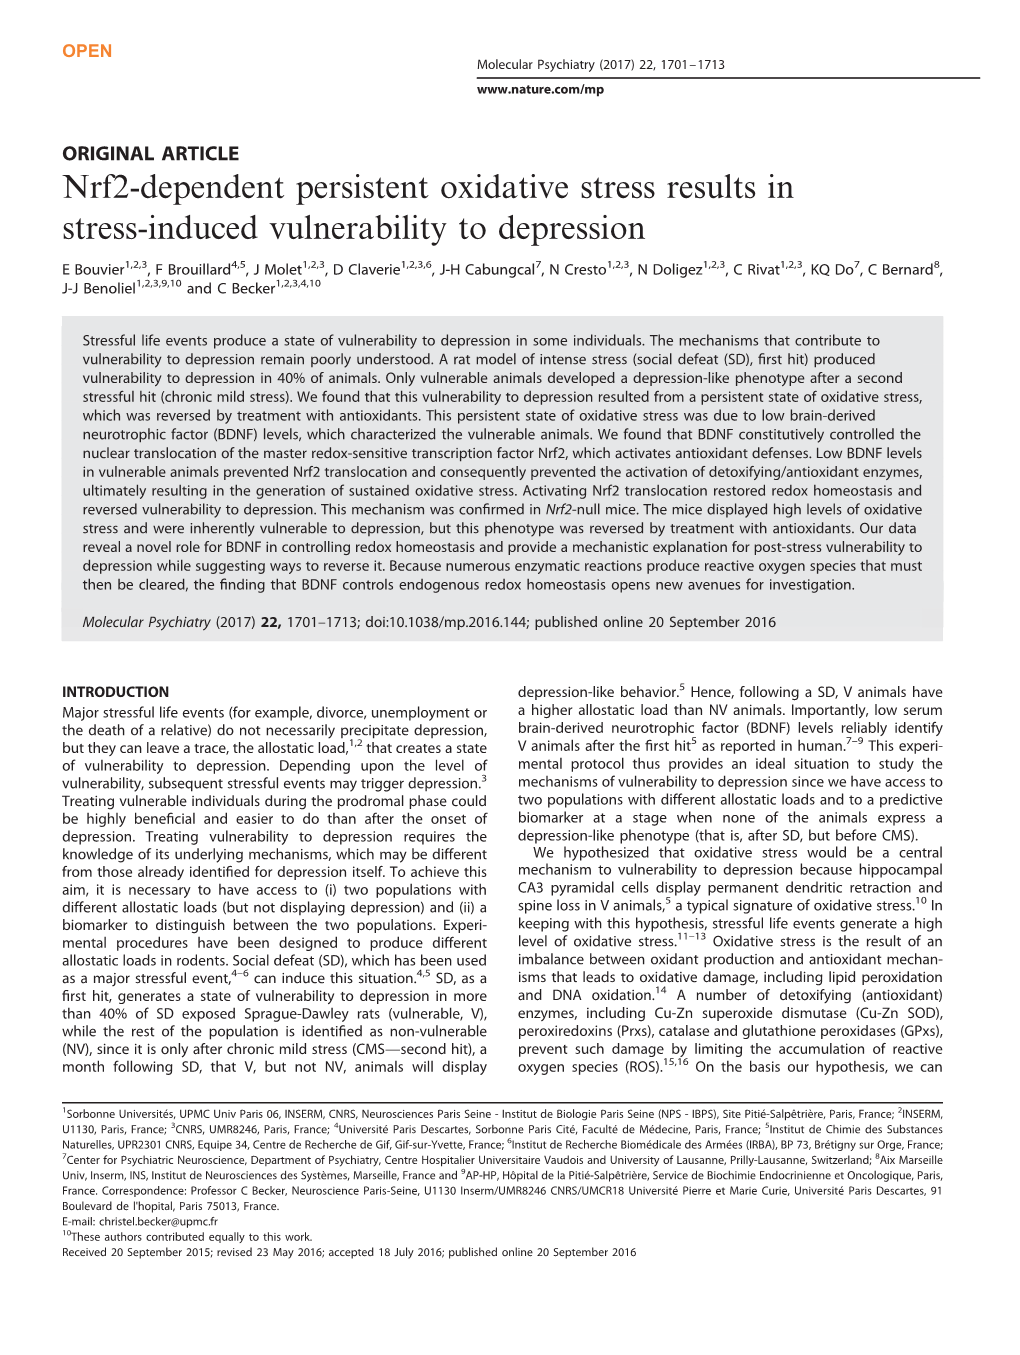 Nrf2-Dependent Persistent Oxidative Stress Results in Stress-Induced Vulnerability to Depression